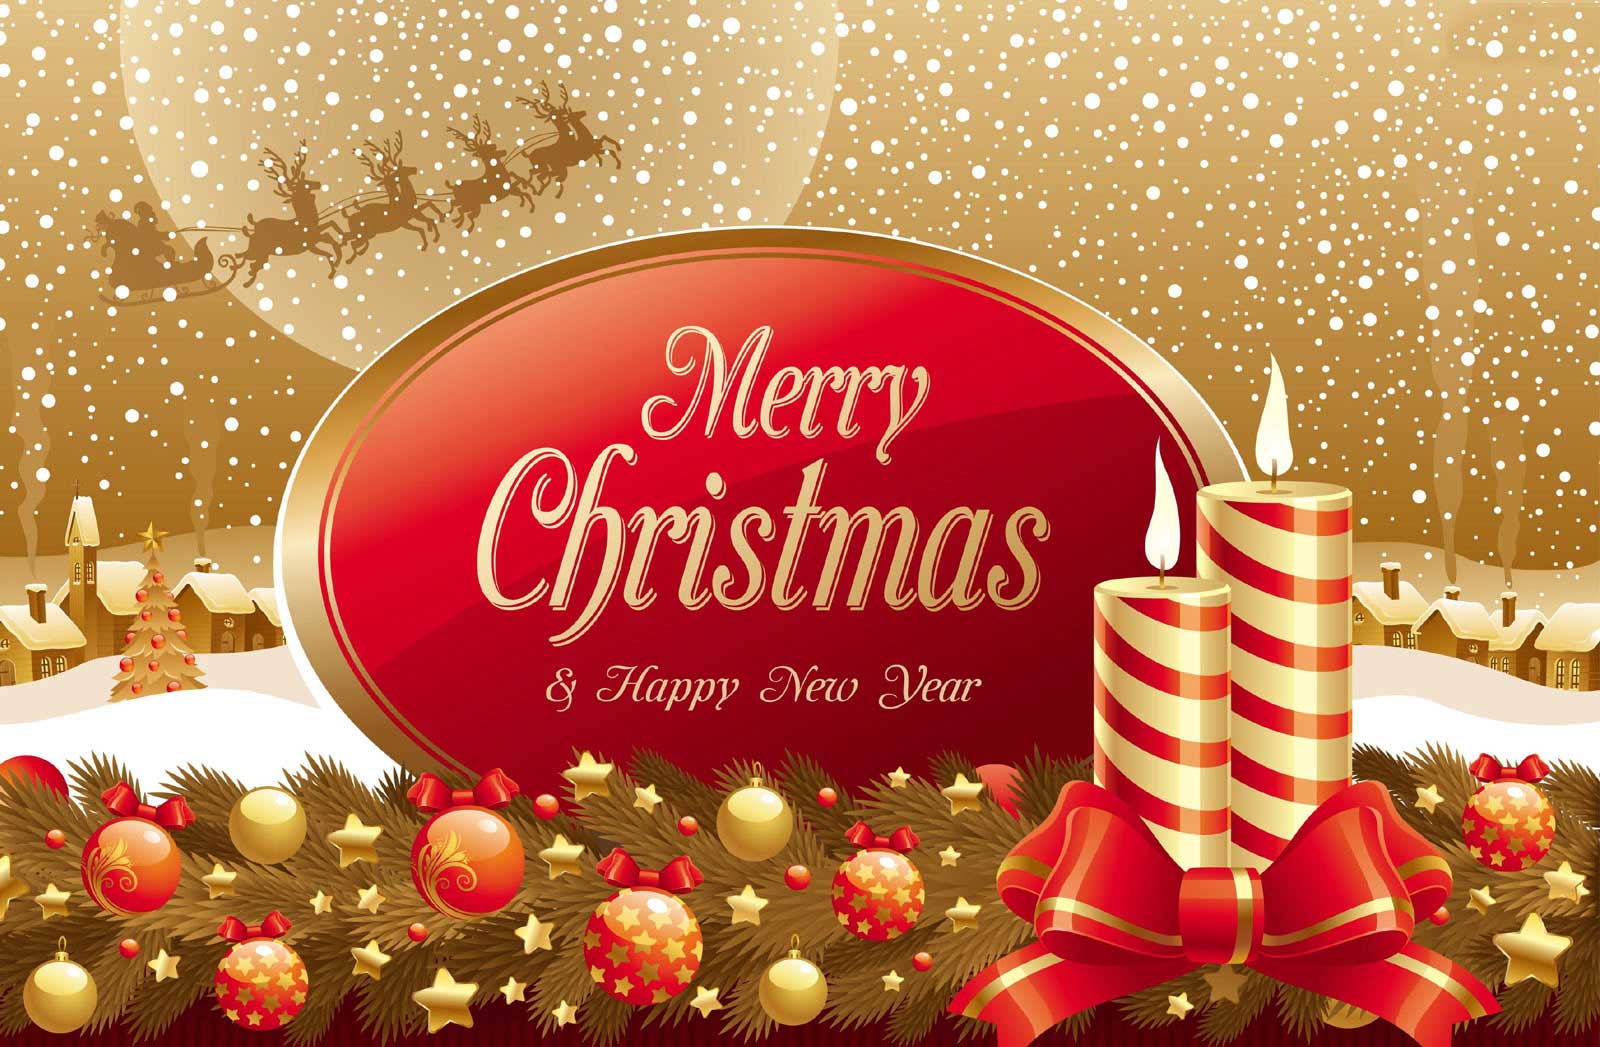 Christmas Wishes Images Hd Download